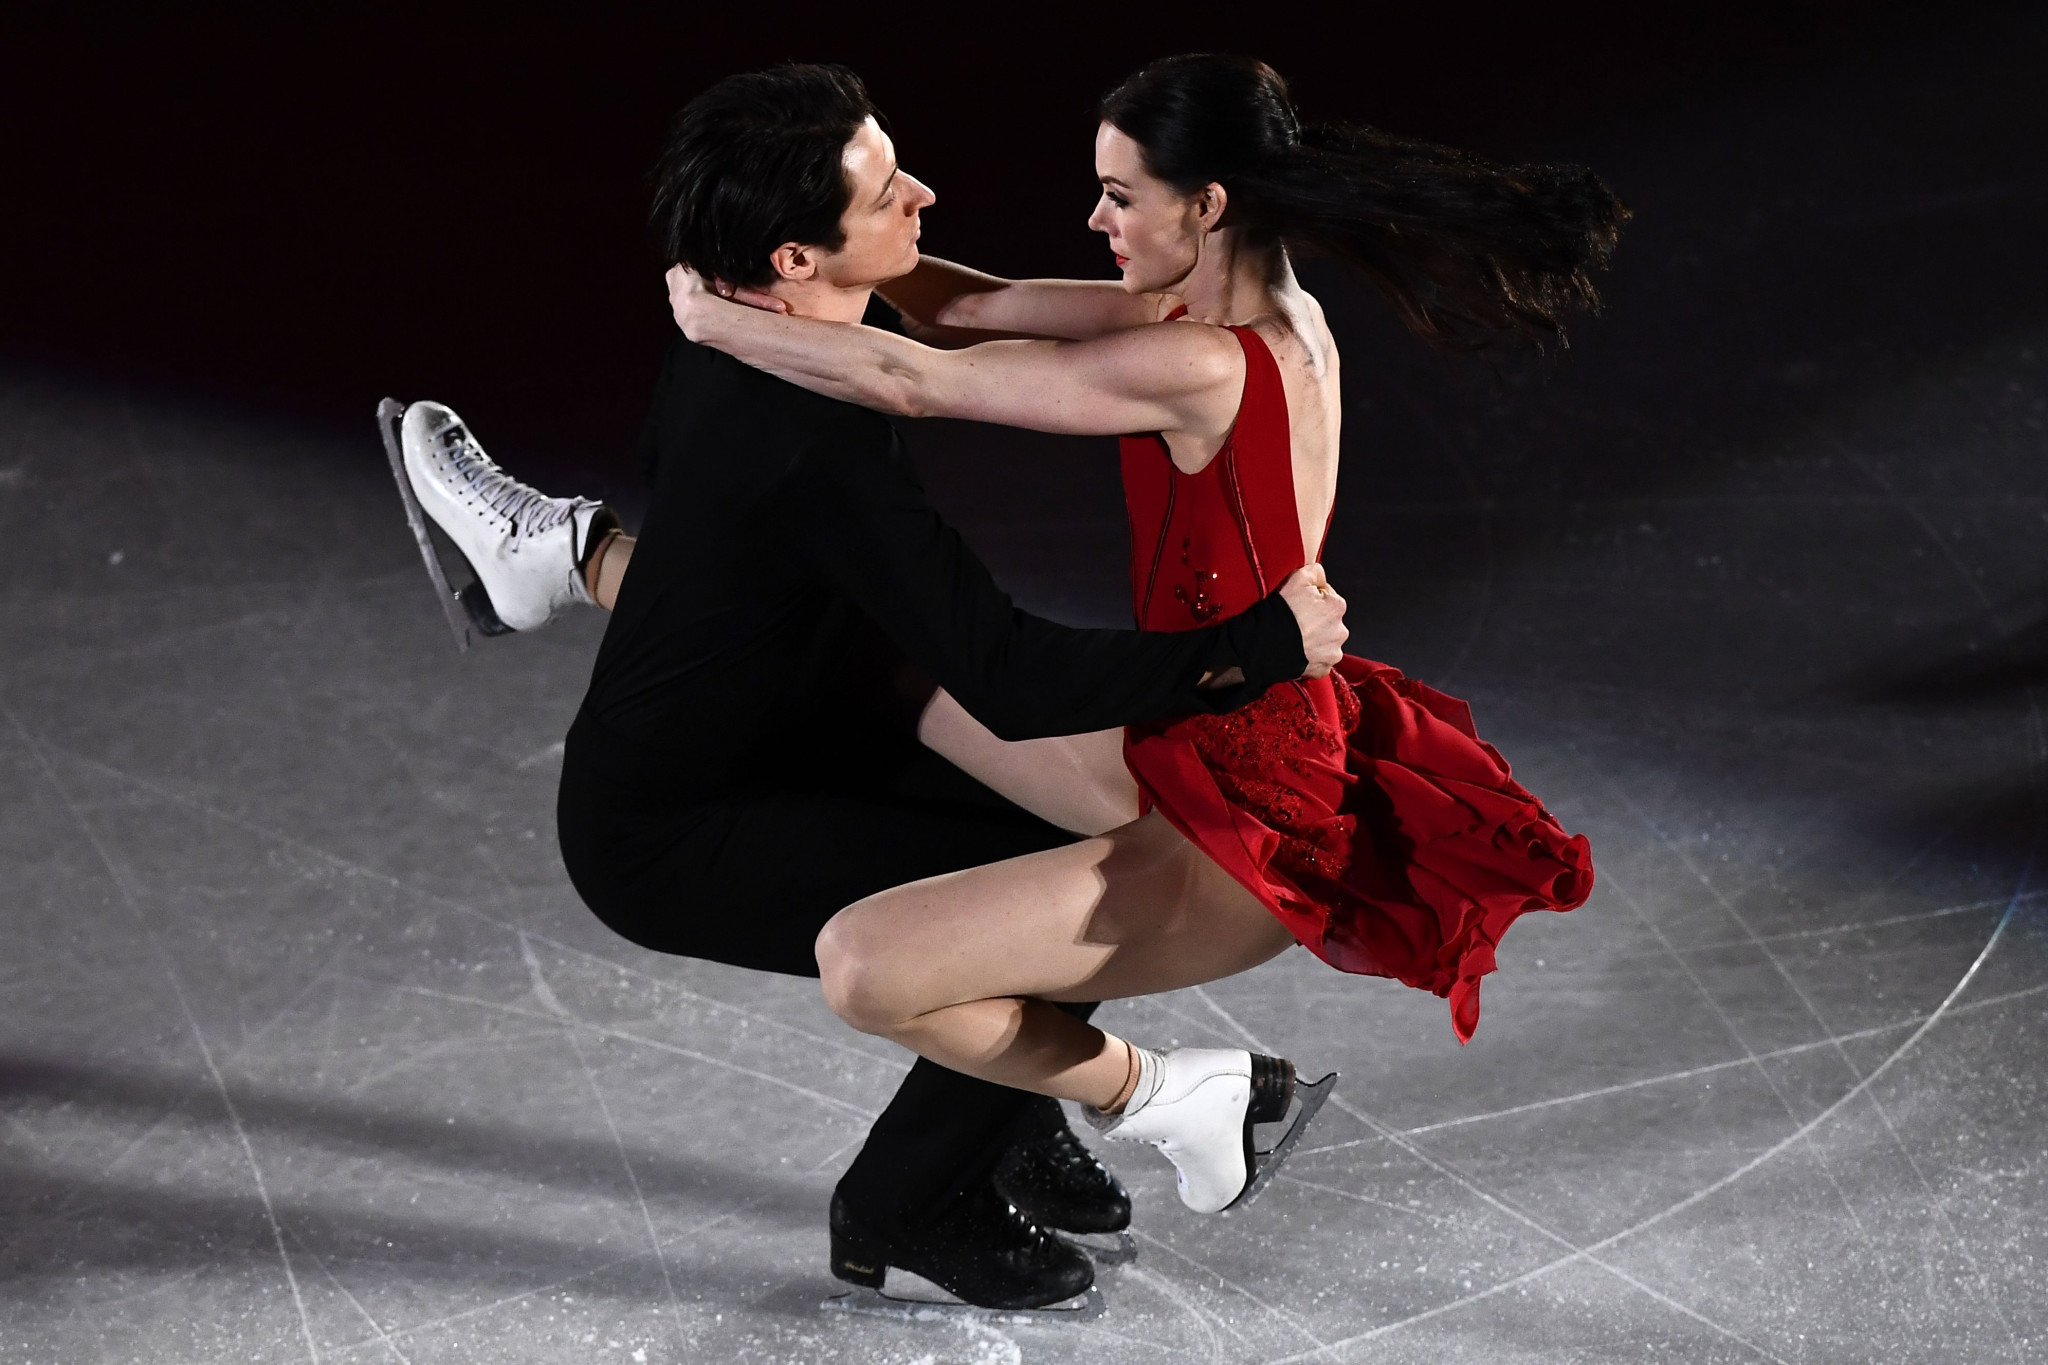 Two-time Olympic and three-time world champions Tessa Virtue and Scott Moir are not included, having retired after Pyeongchang 2018 ©Getty Images